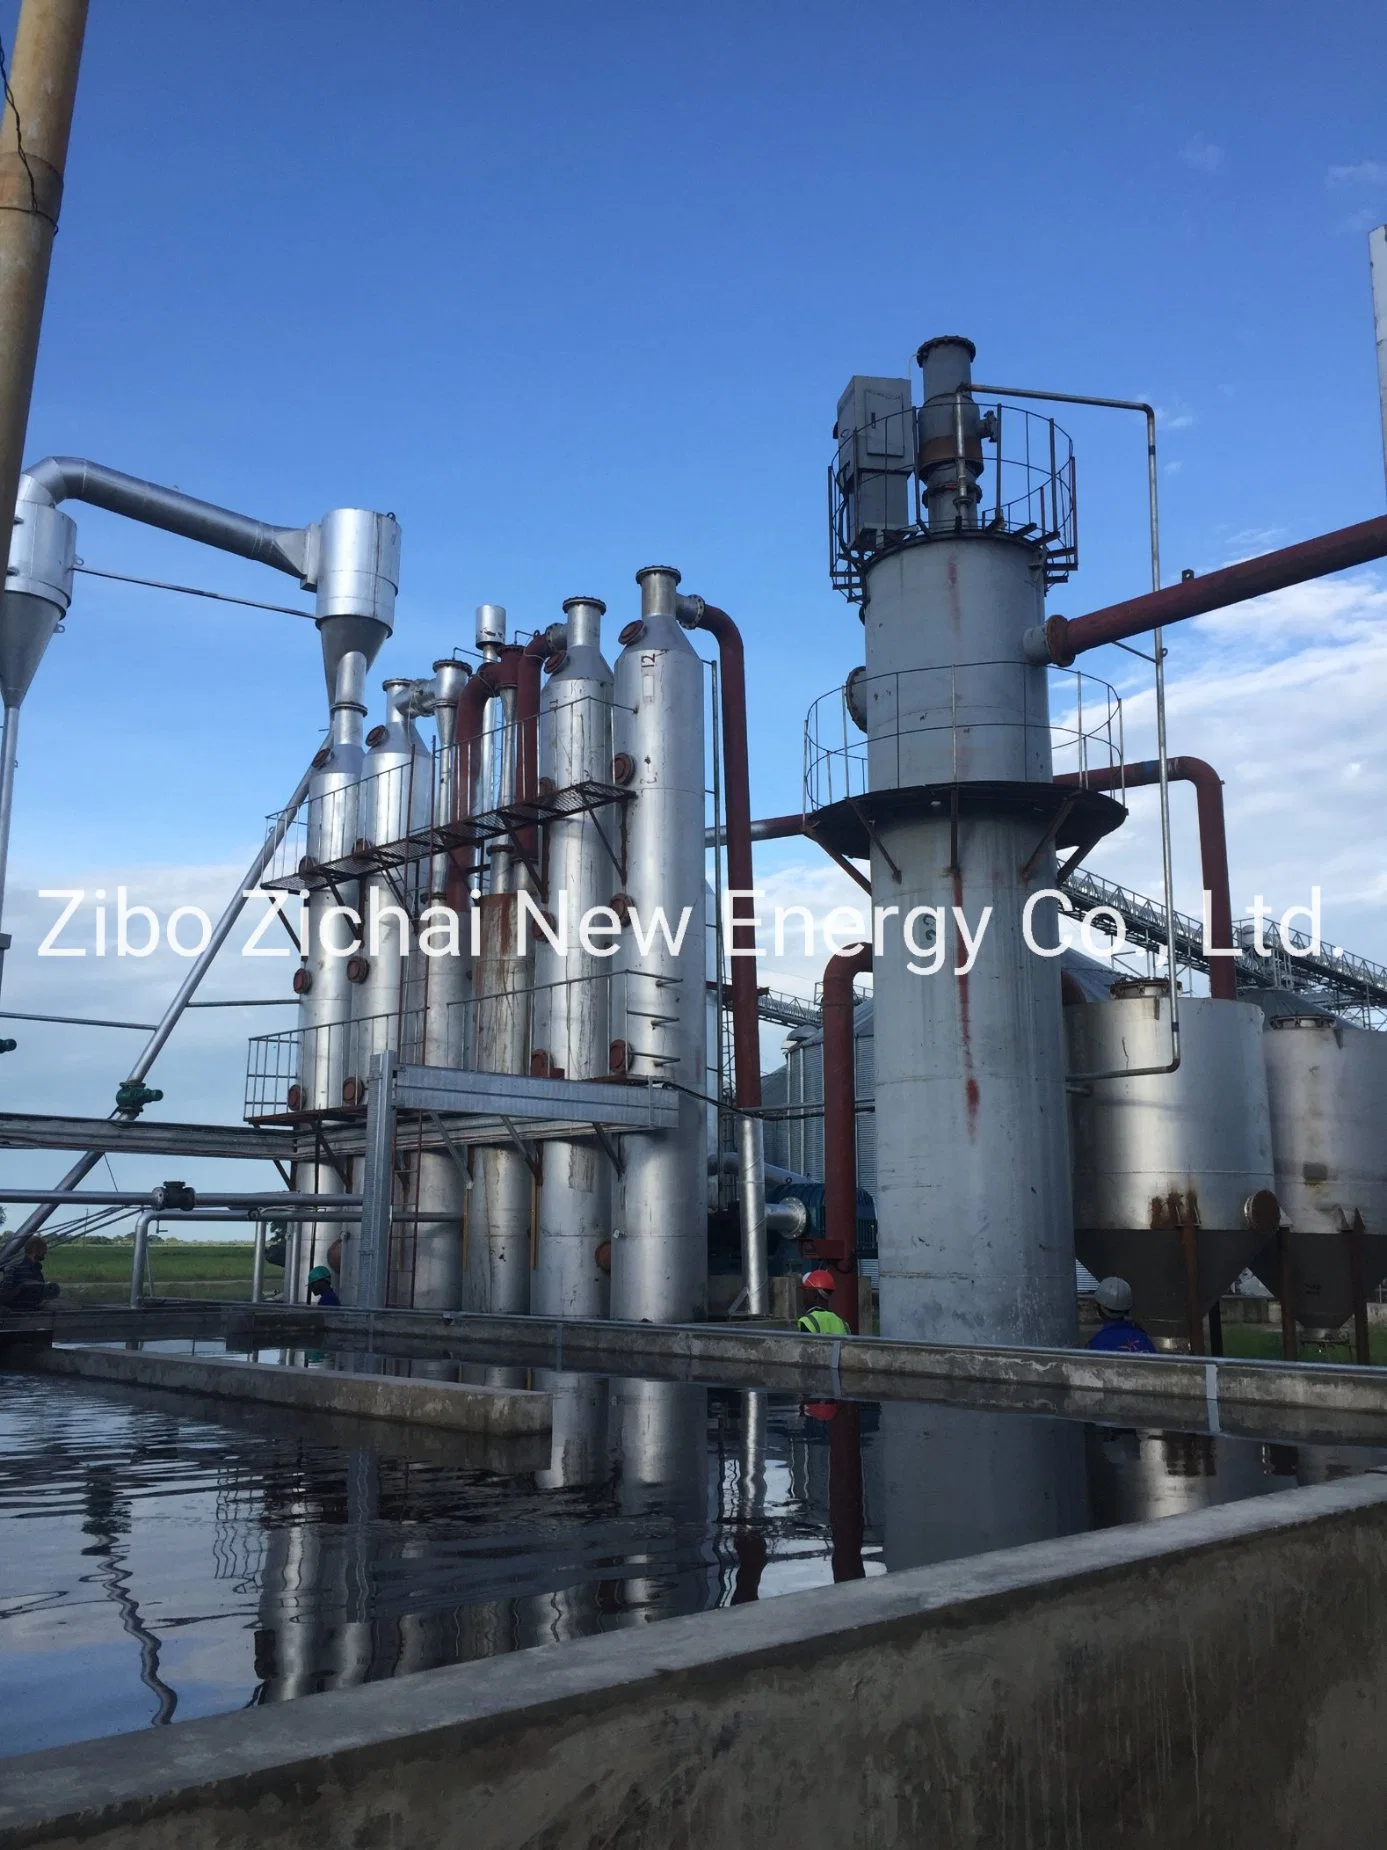 Zichai Gasification Power Plant in Municipal Solid Waste